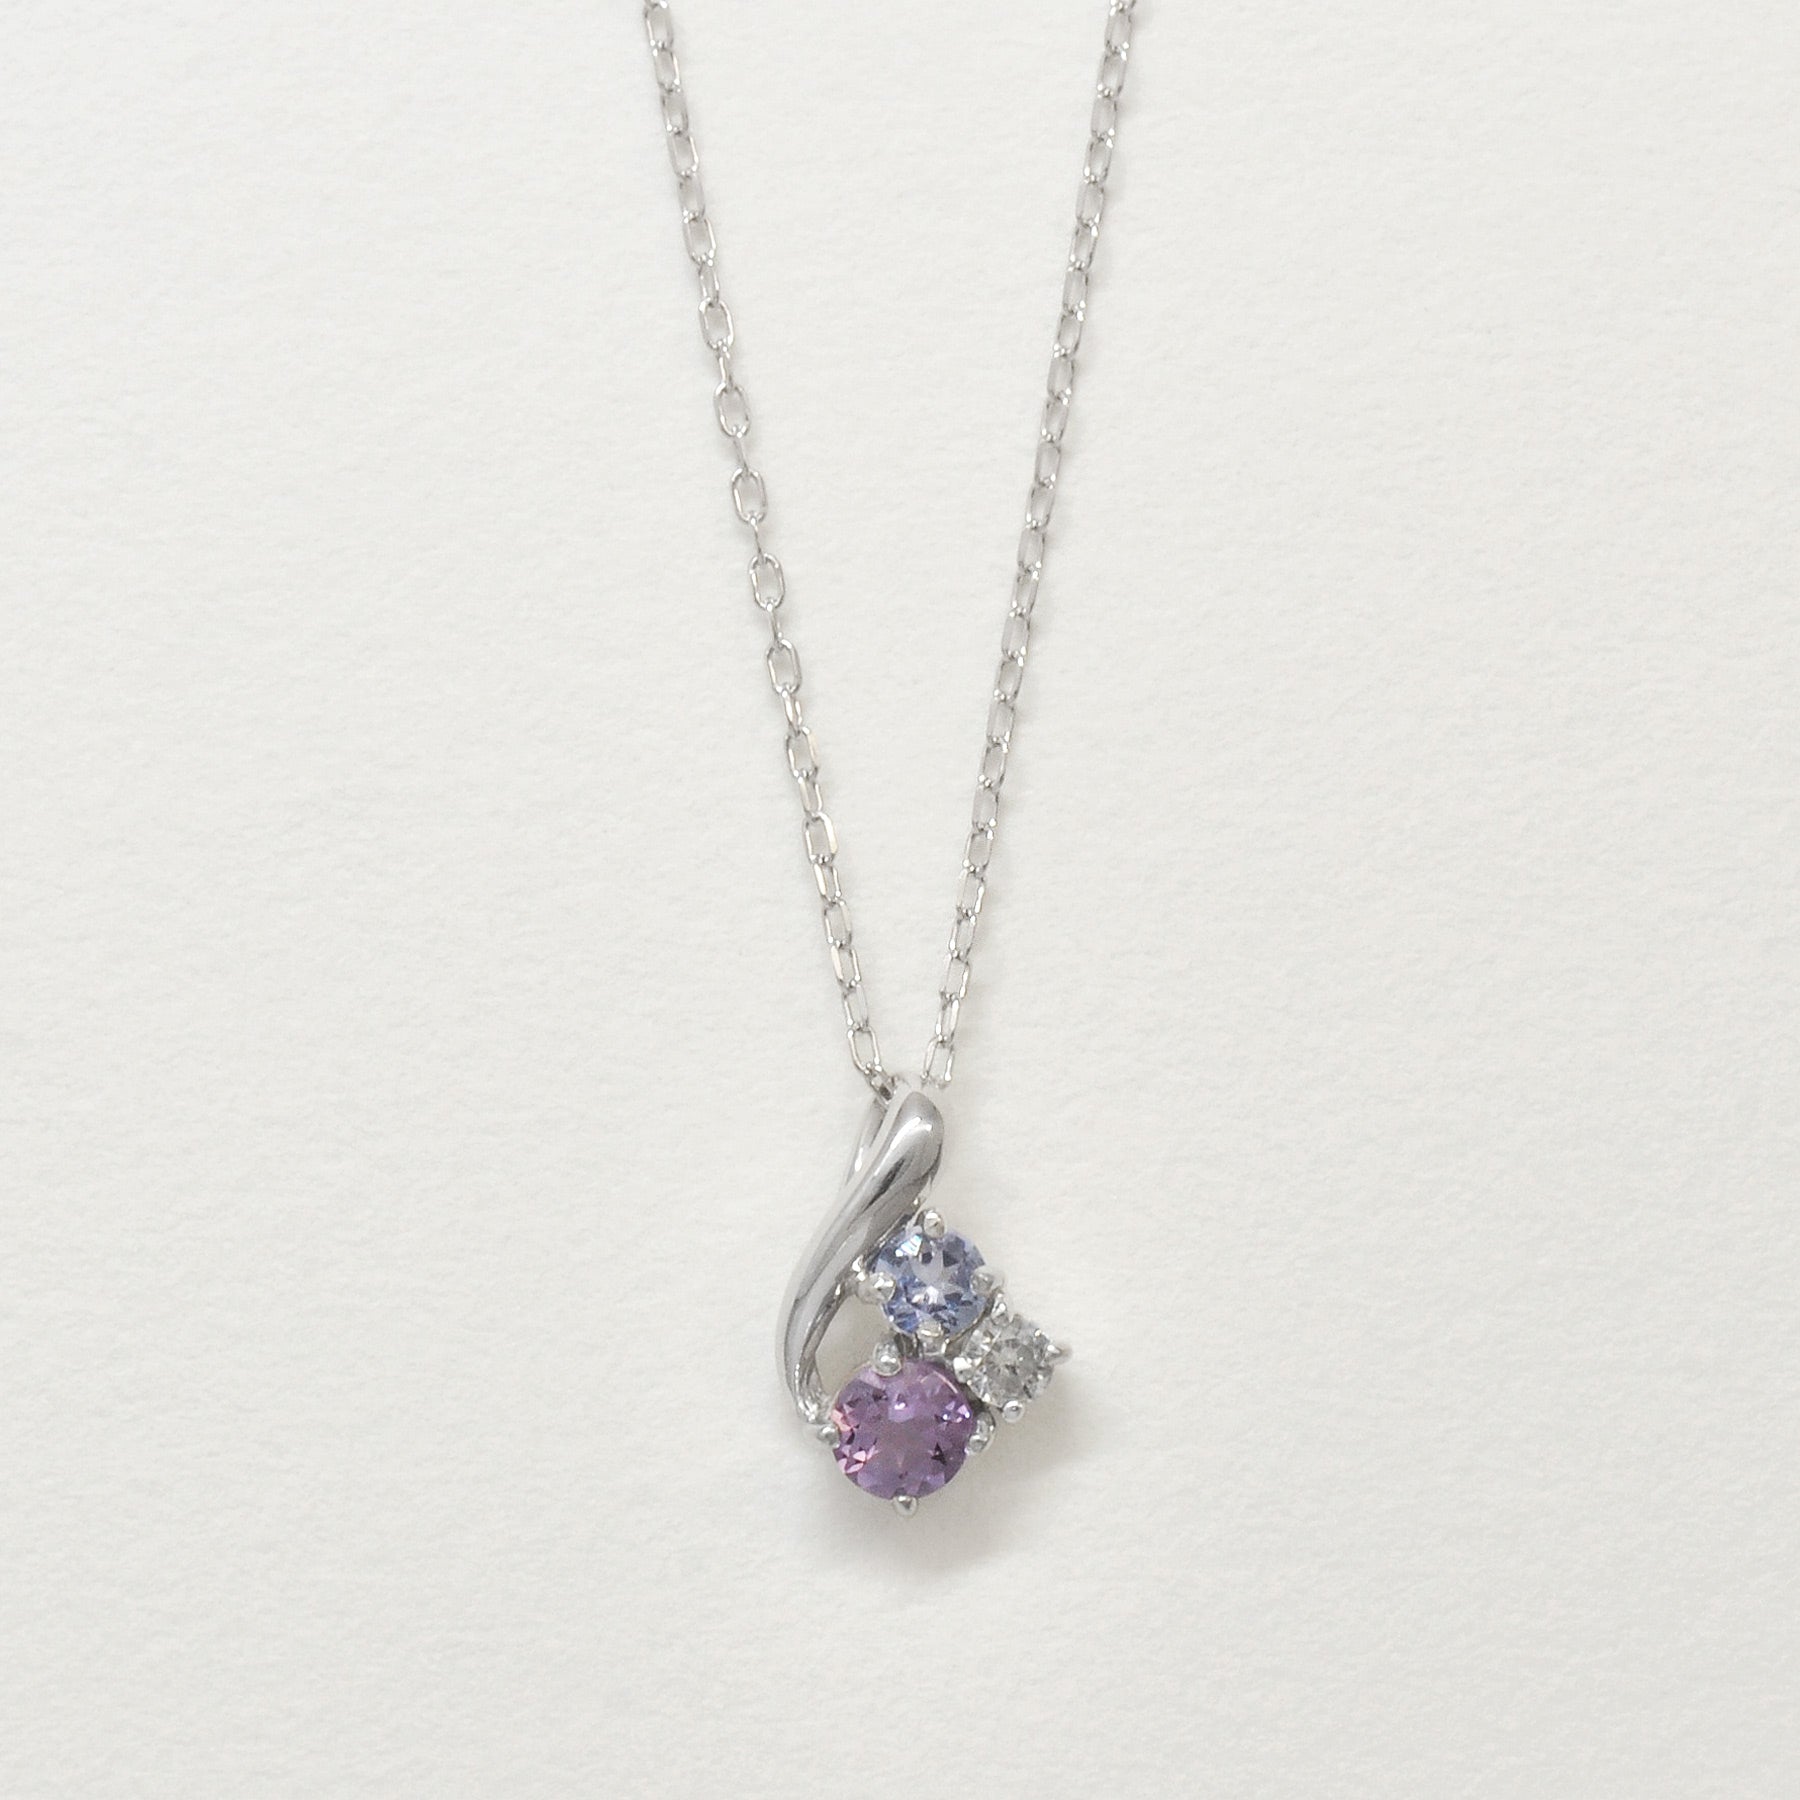 10K White Gold Tanzanite Twisted Necklace - Product Image